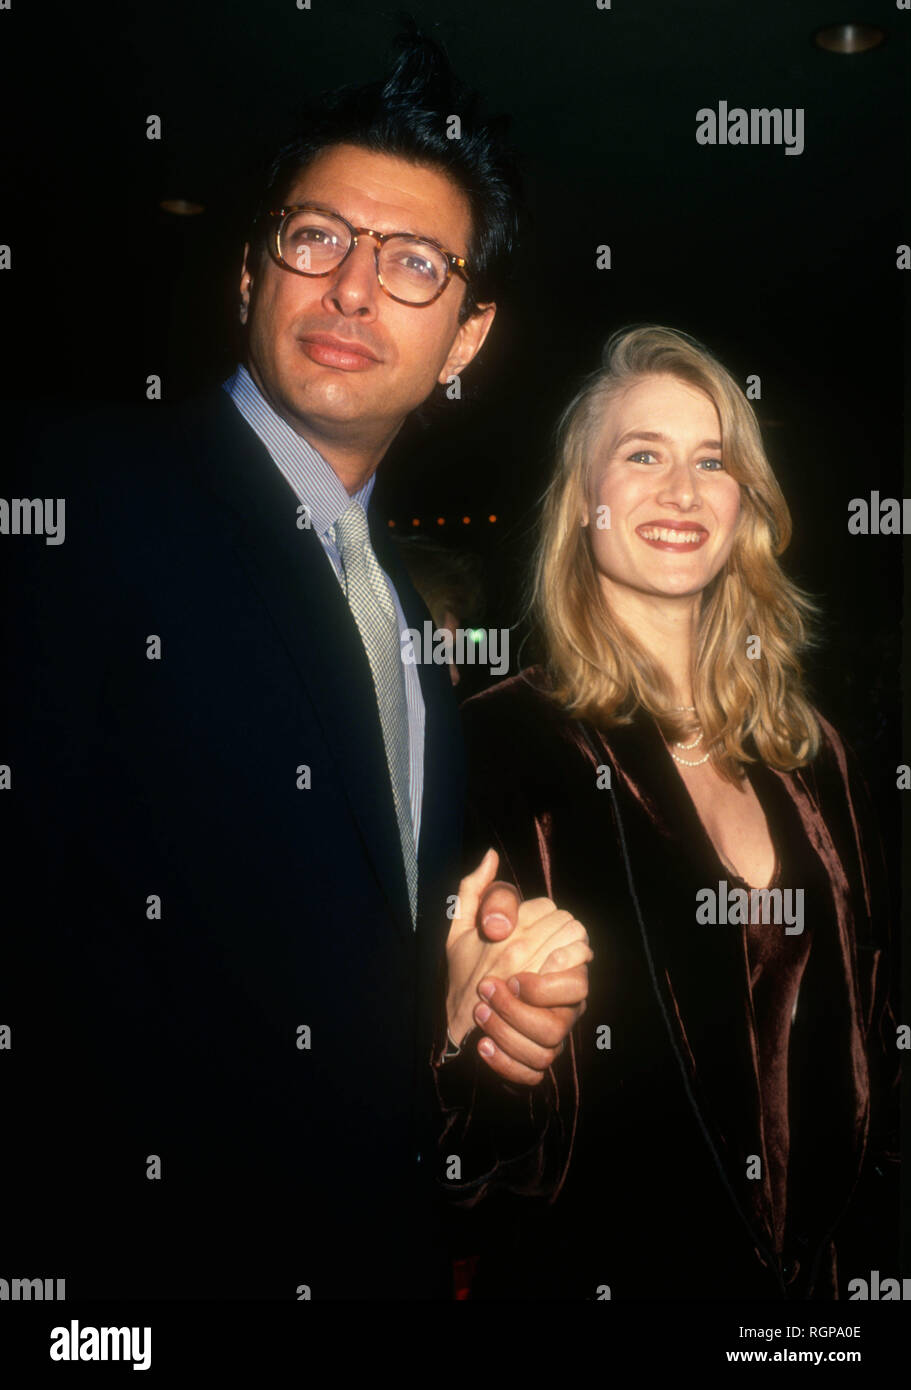 CENTURY CITY,  CA - NOVEMBER 30: Actor Jeff Goldblum and actress Laura Dern attend Opening Night of 'Sunset Boulevard' on November 30, 1993 at the Shubert Theater in Century City, California. Photo by Barry King/Alamy Stock Photo Stock Photo